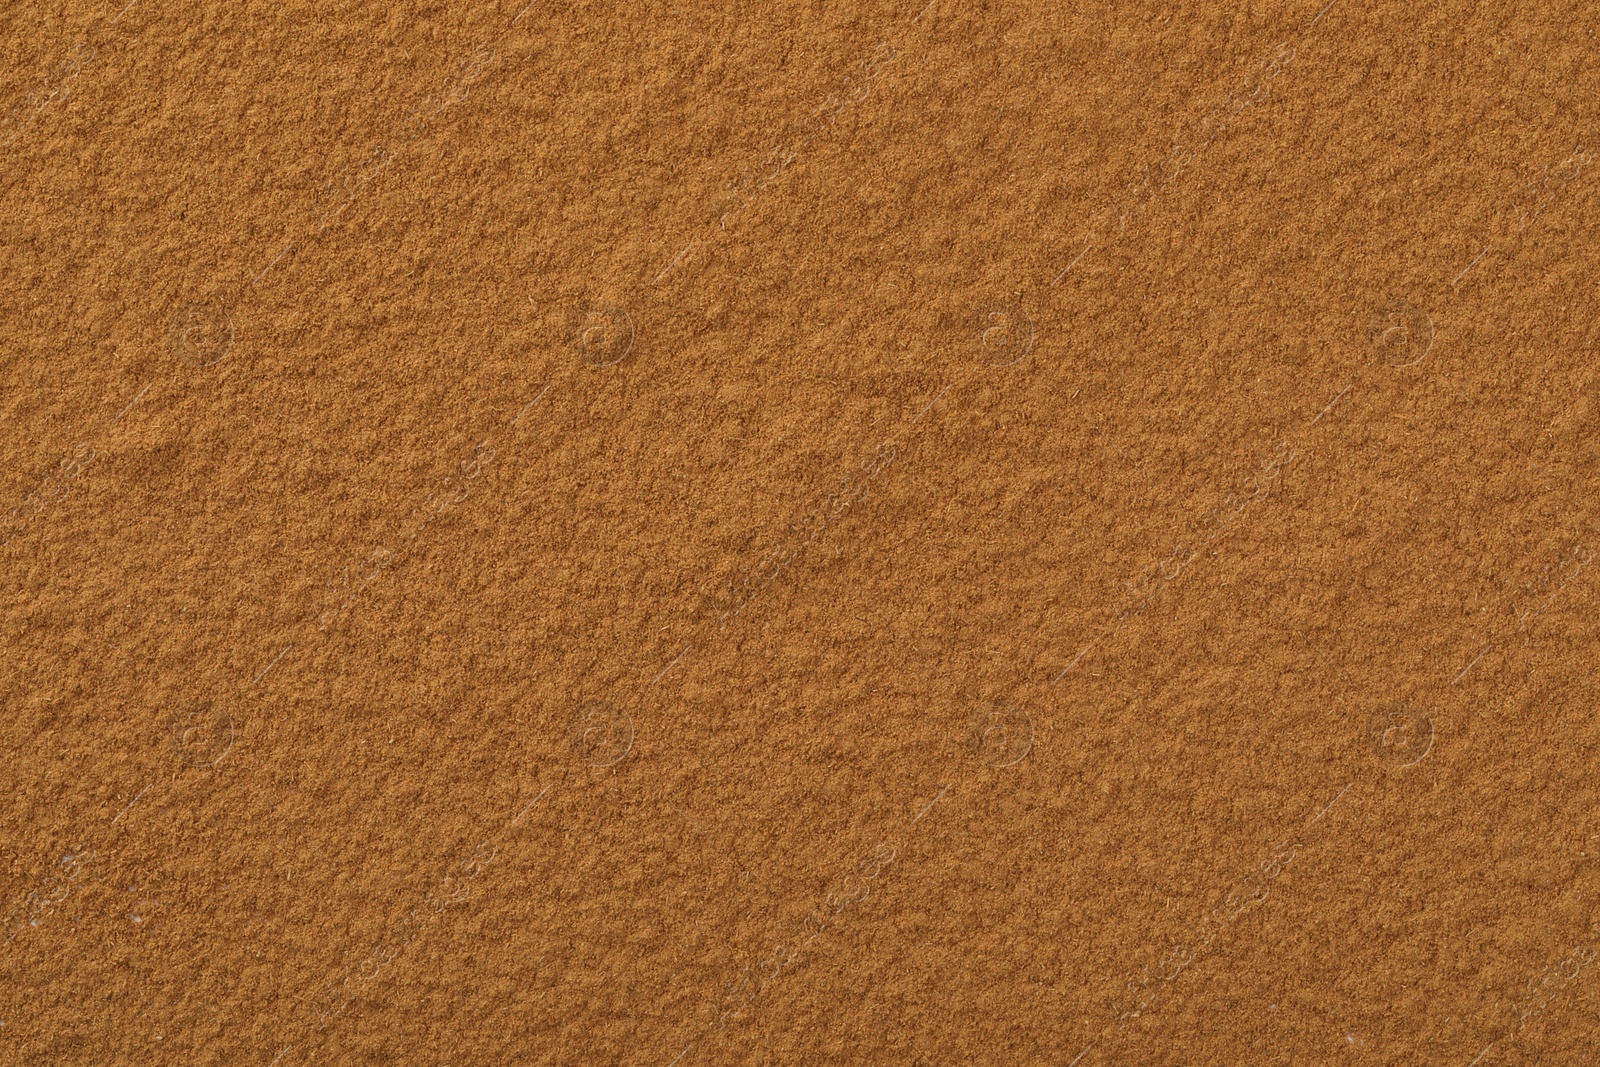 Photo of Dry aromatic cinnamon powder as background, top view